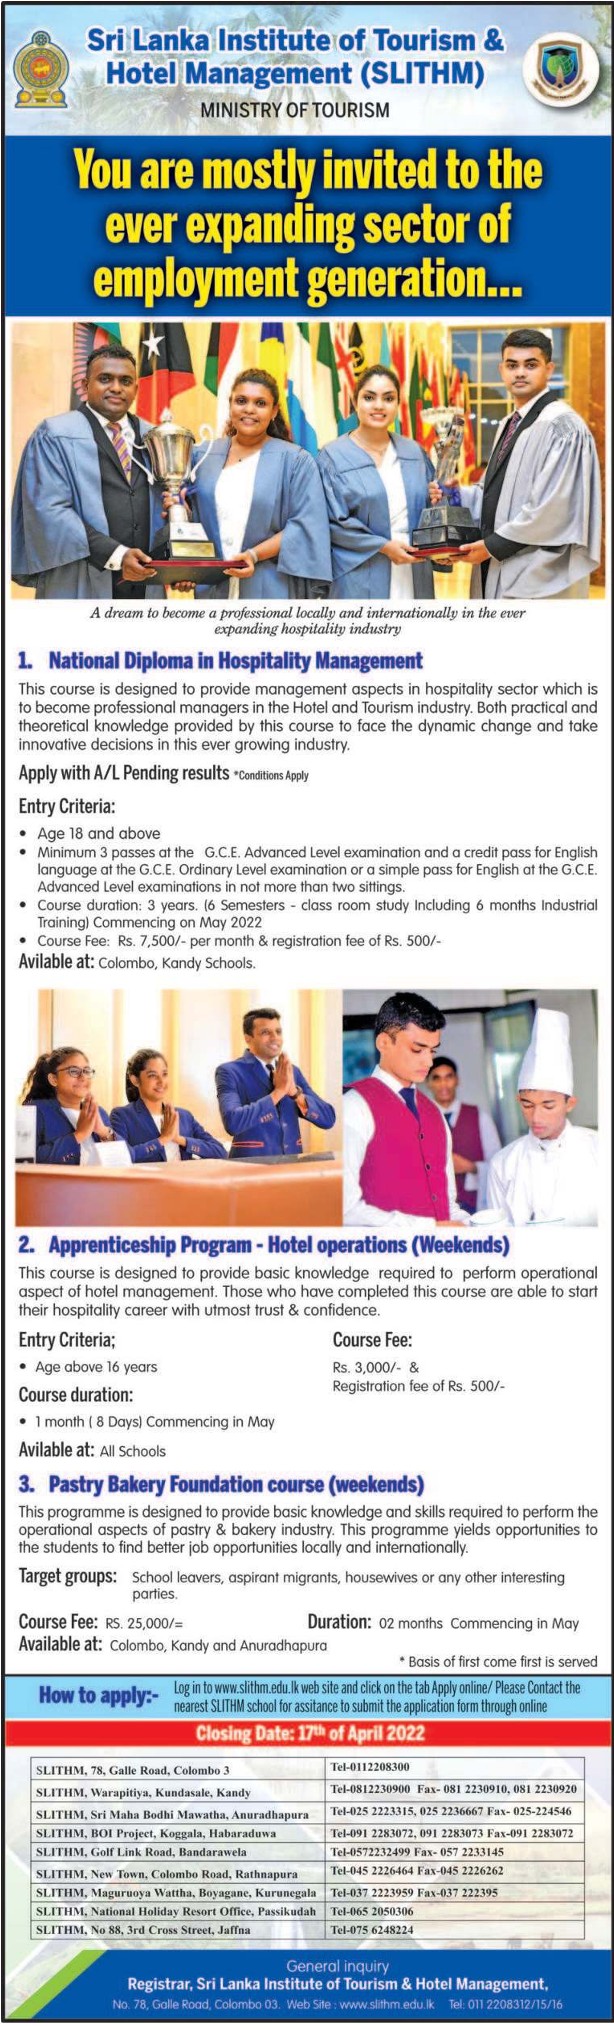 Sri Lanka Institute of Tourism and Hotel Management Courses 2022